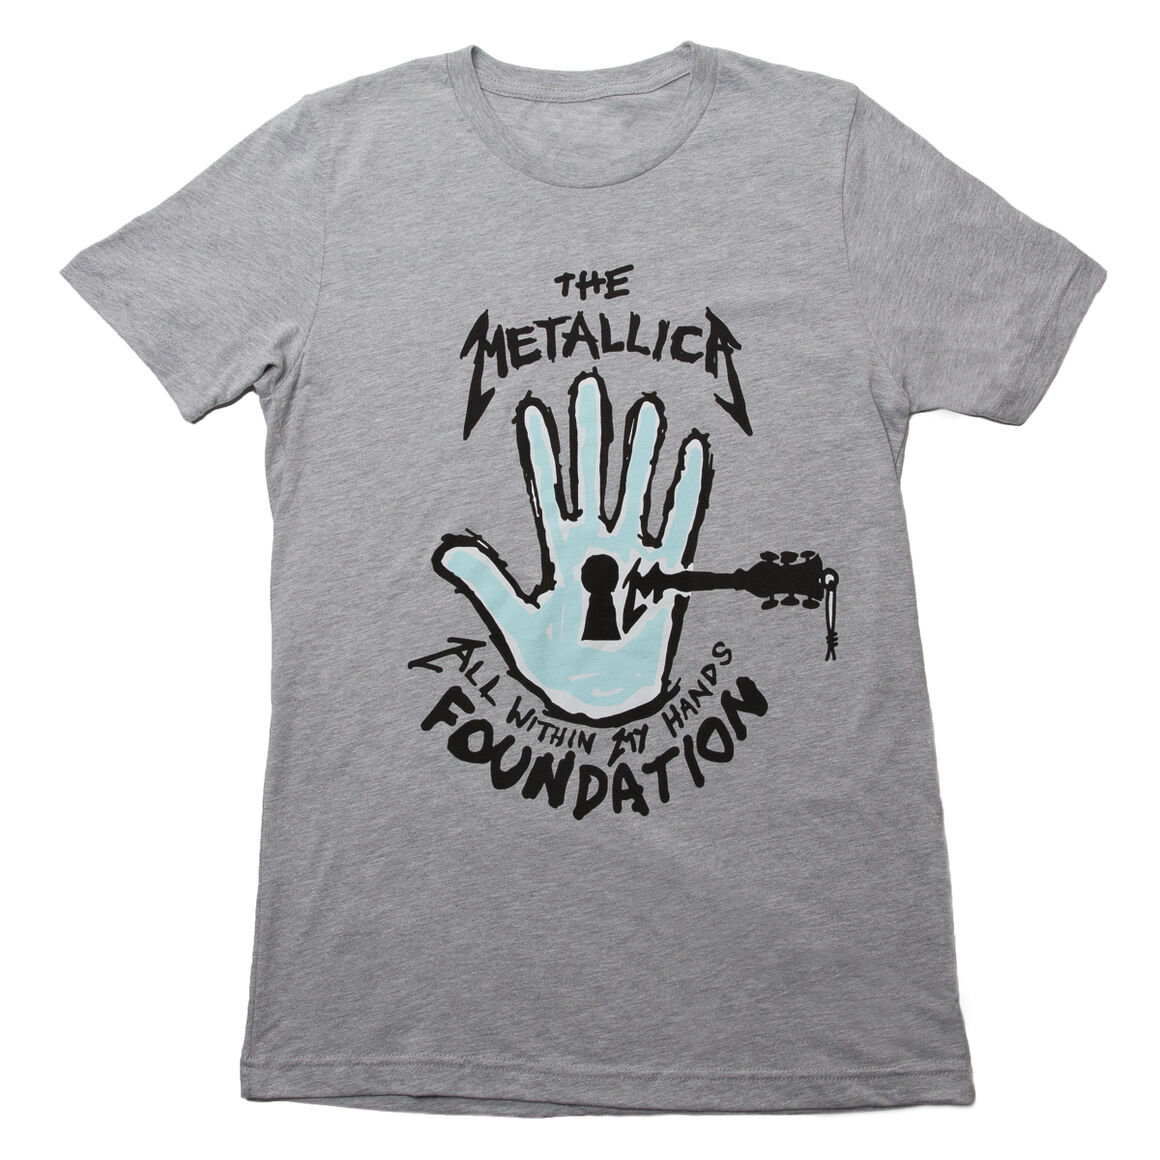 All Within My Hands T-Shirt (Grey), , hi-res